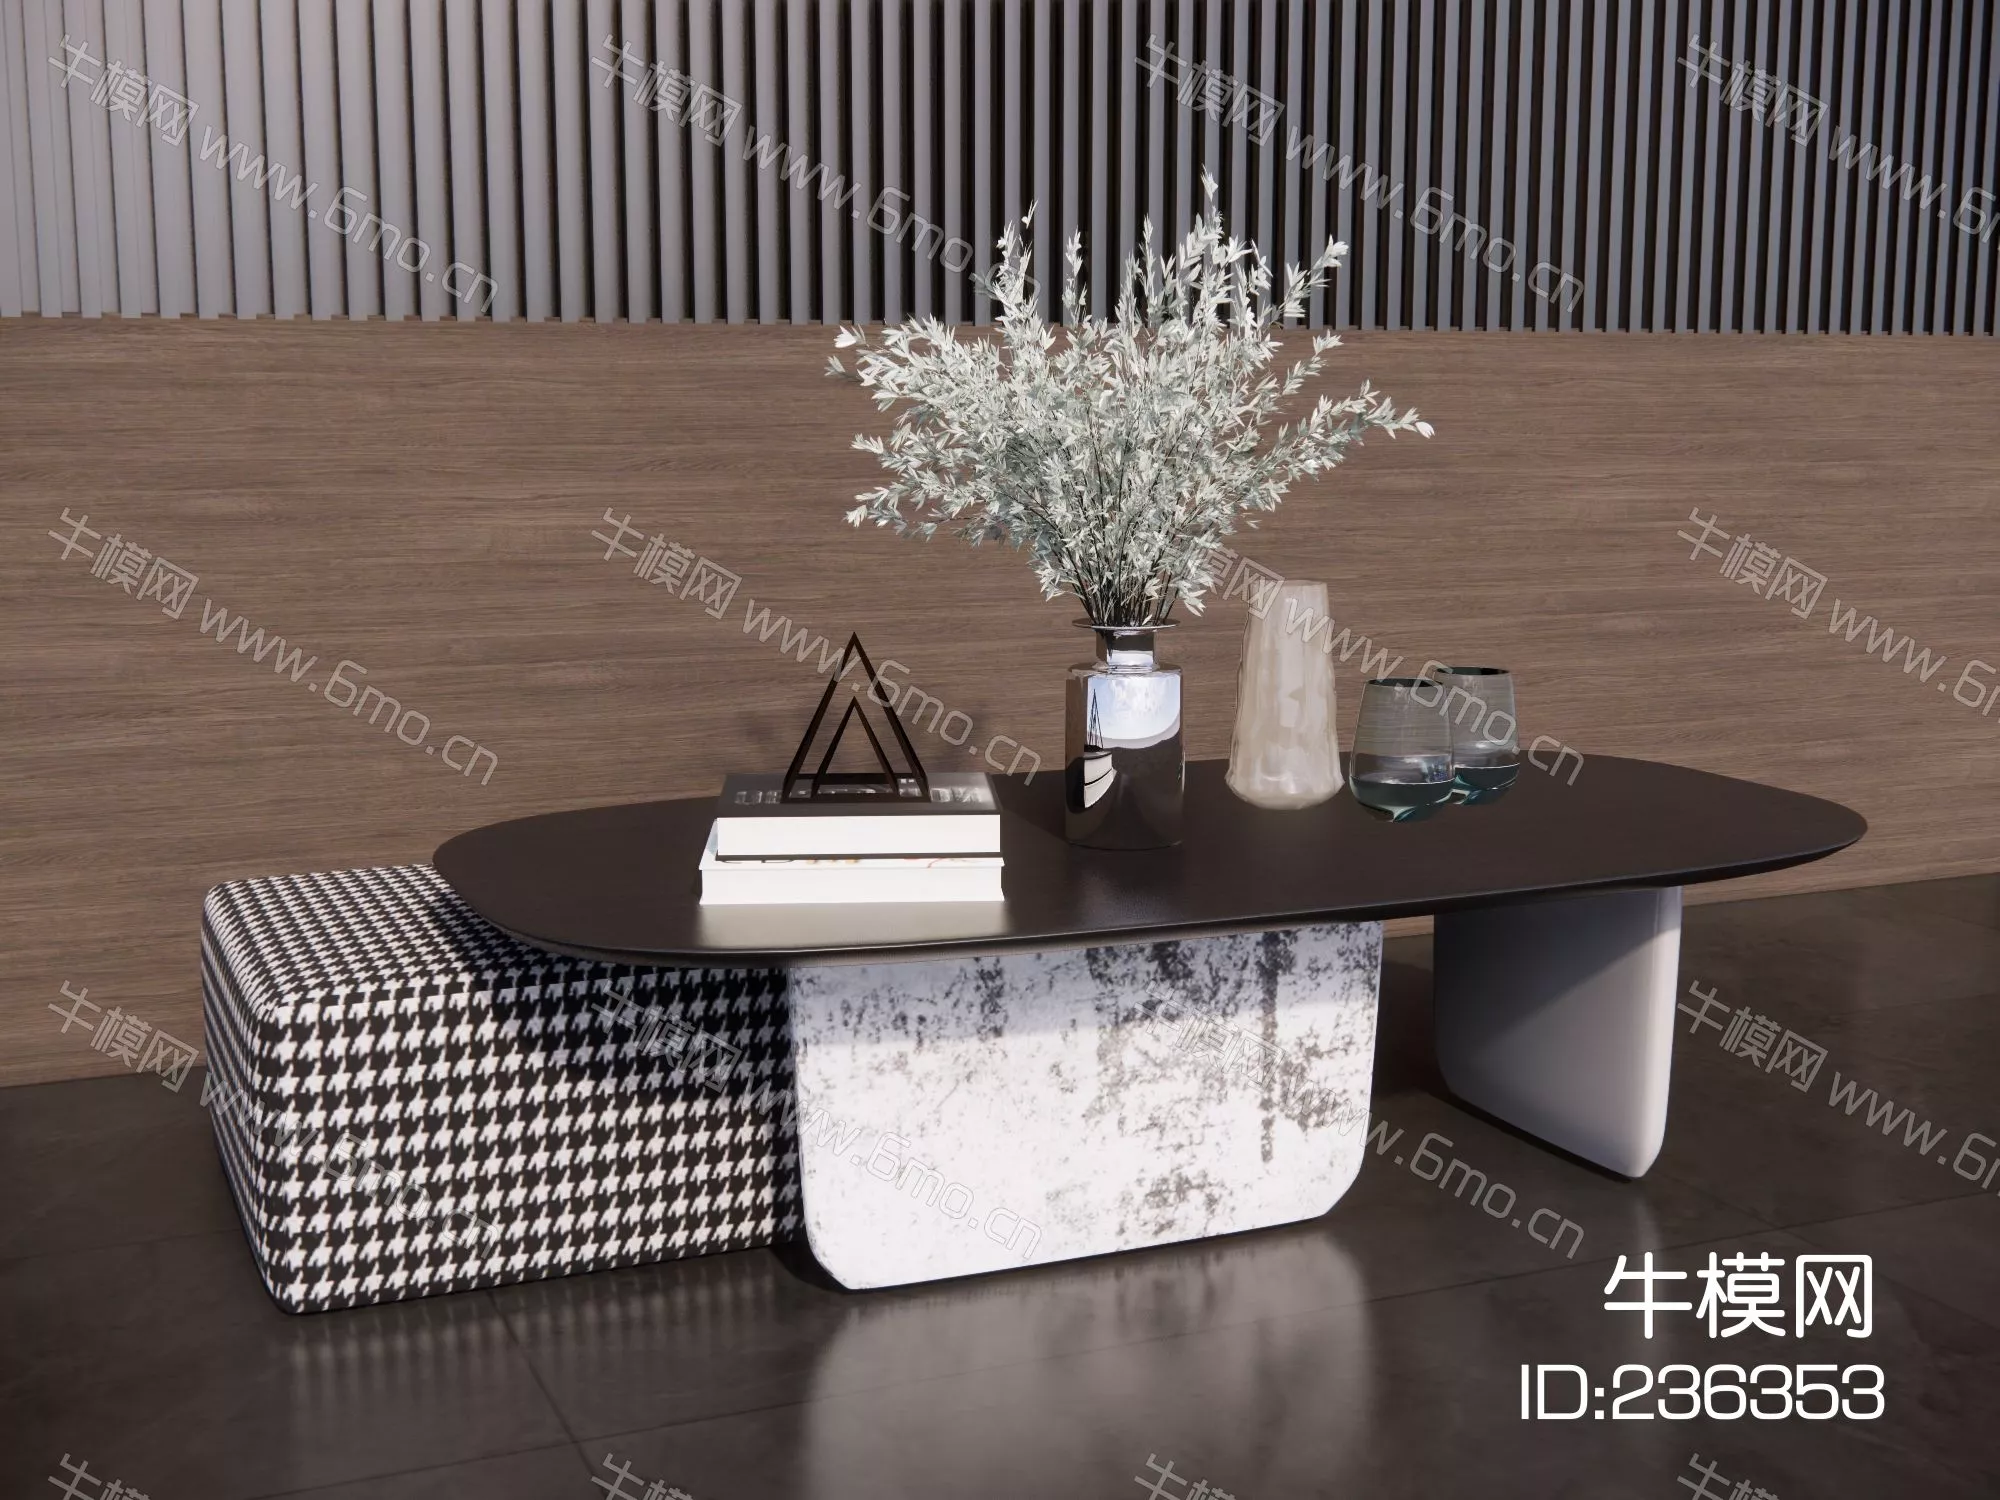 MODERN COFFEE TABLE - SKETCHUP 3D MODEL - ENSCAPE - 236353